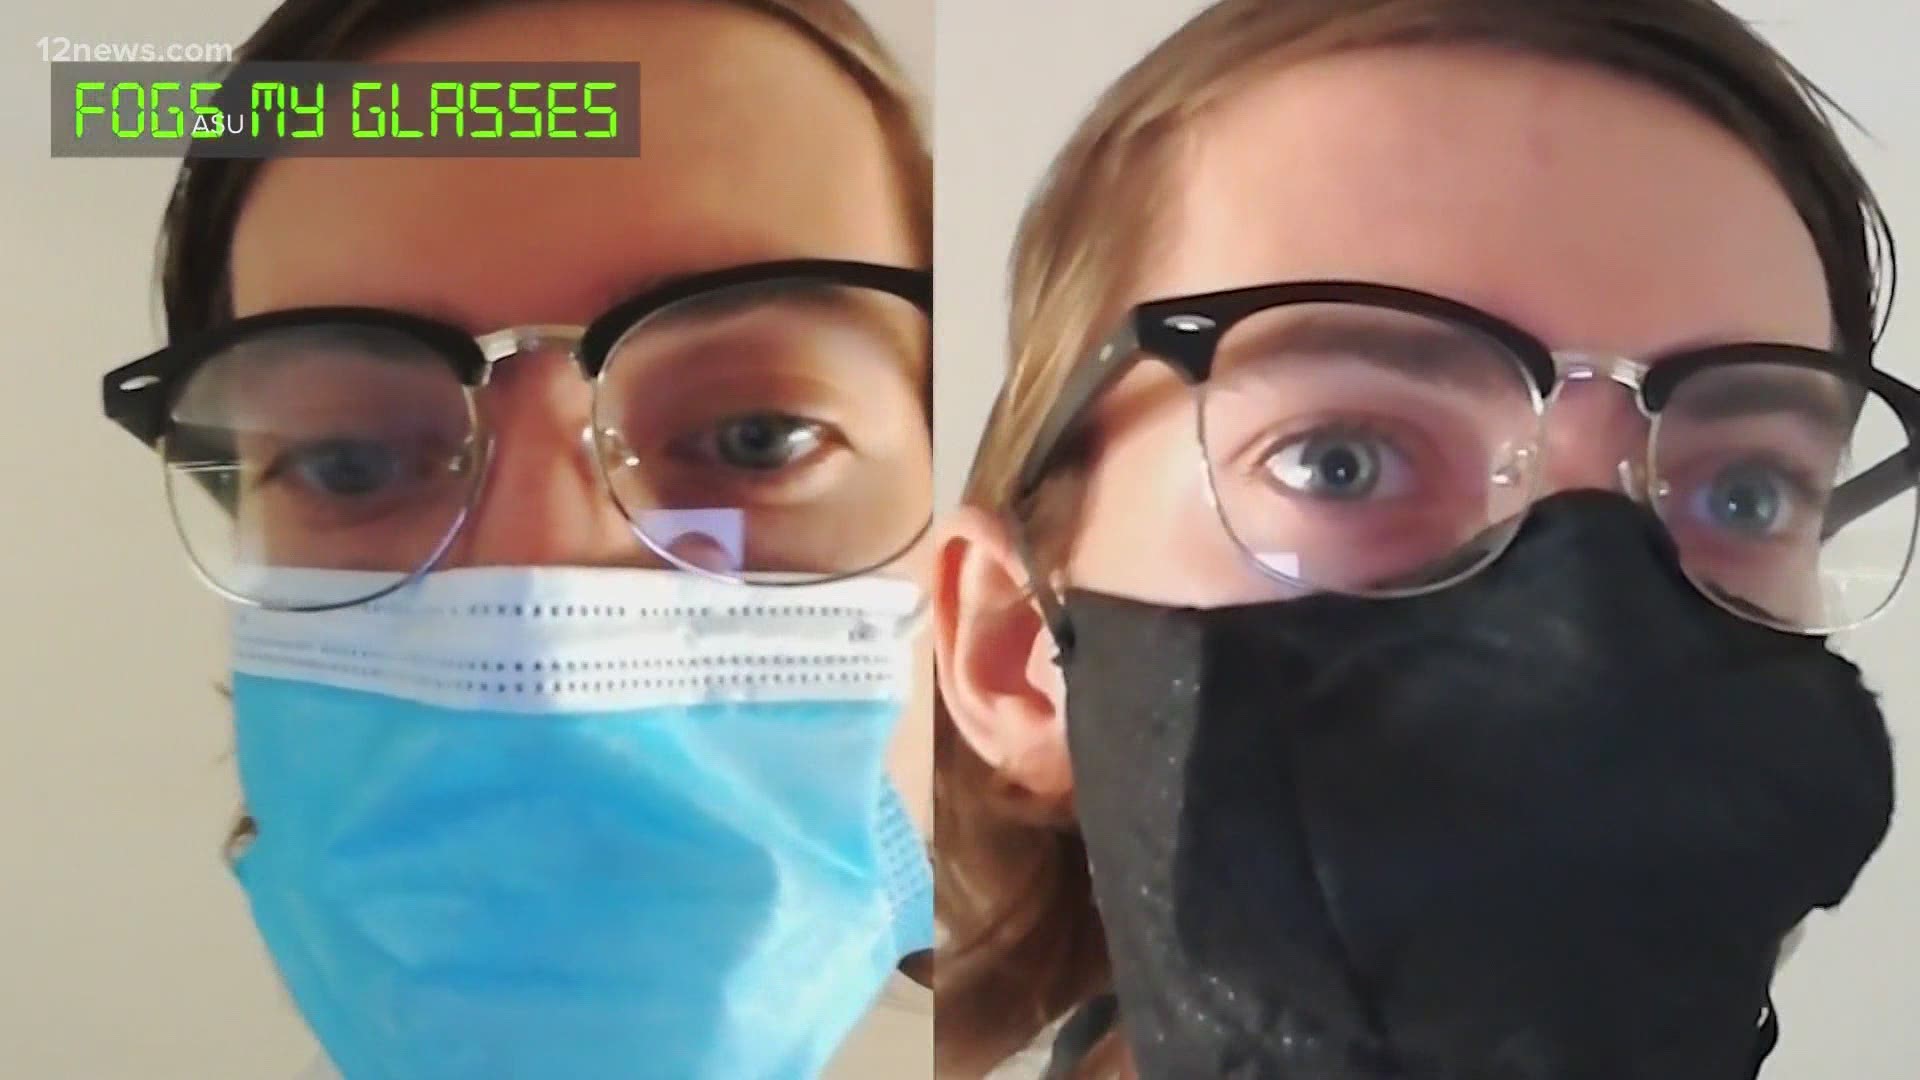 A group of ASU students won $500,000 for solving one of the biggest complaints about masks since the start of the pandemic. They created an anti-fog mask!